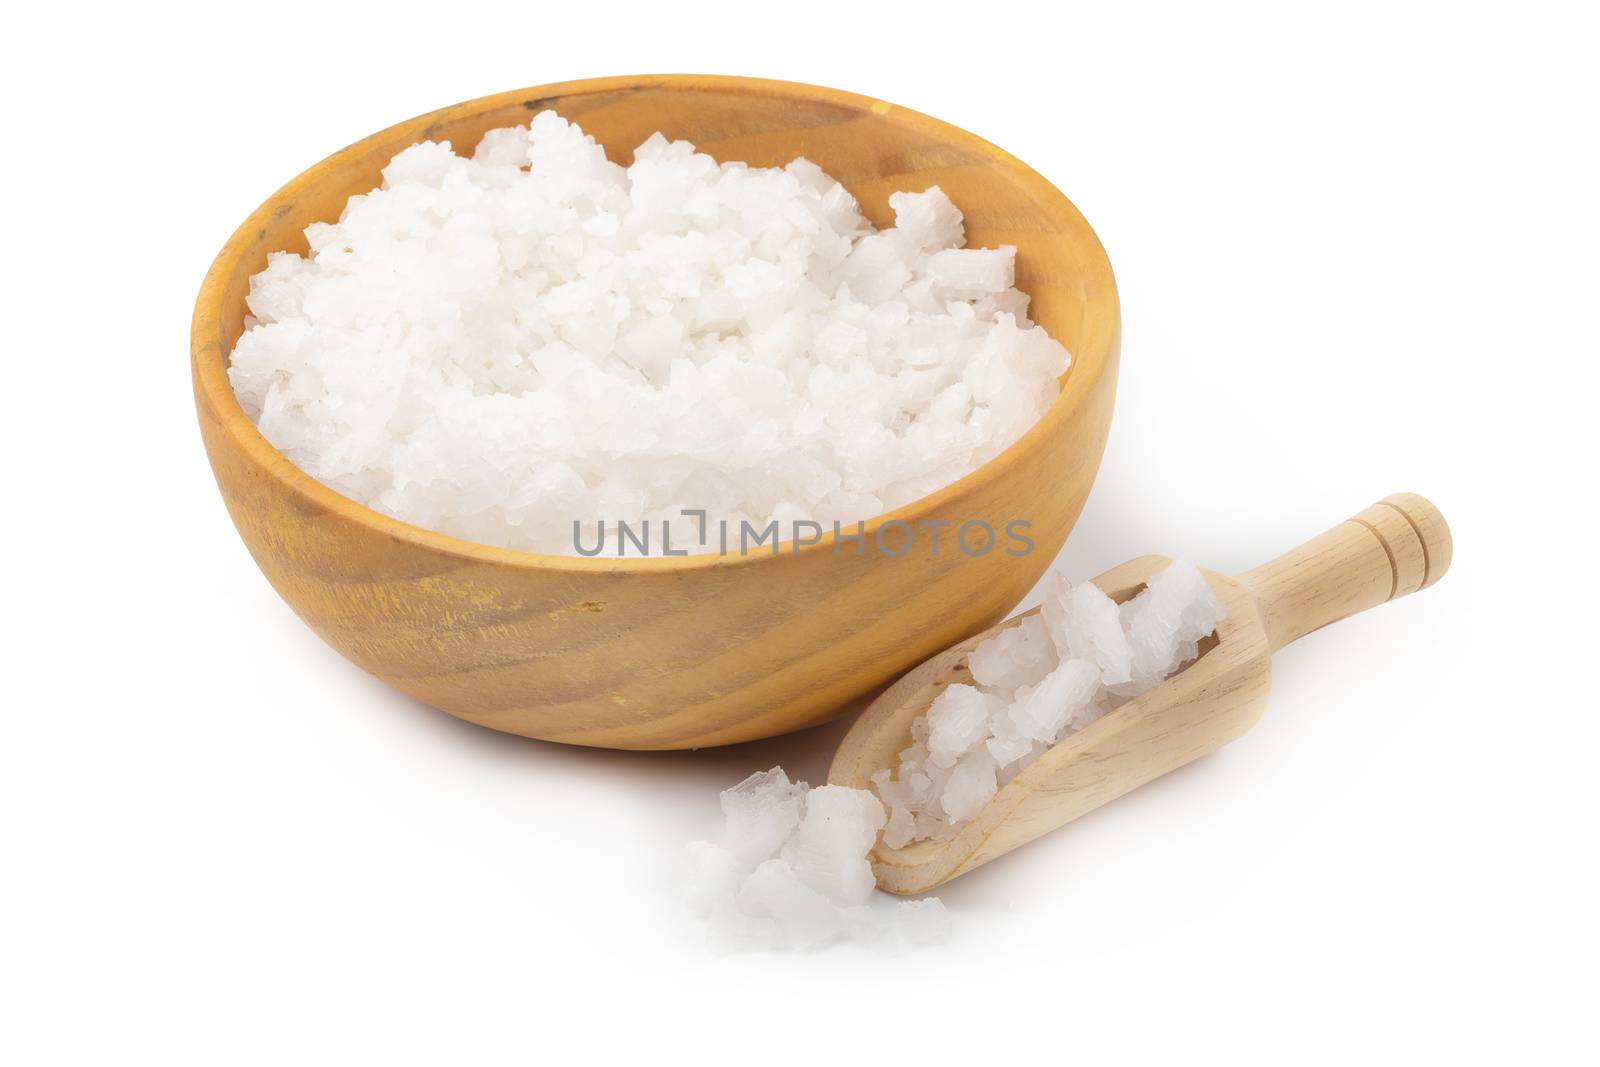 Organic sea white salt tablets in a wooden bowl on white background.